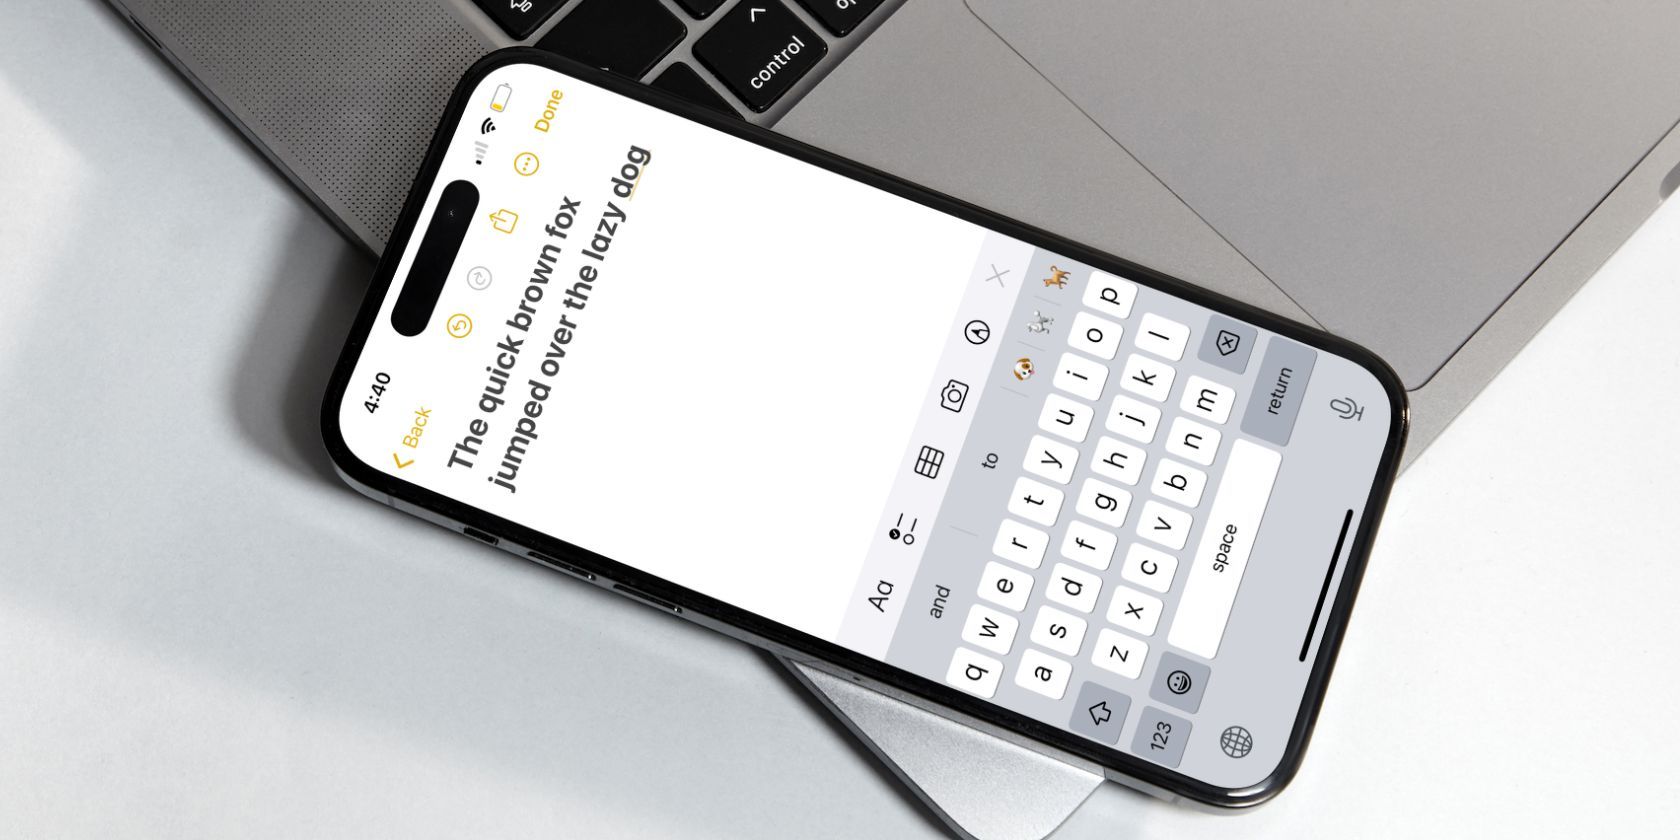 iphone notes app showing on screen keyboard